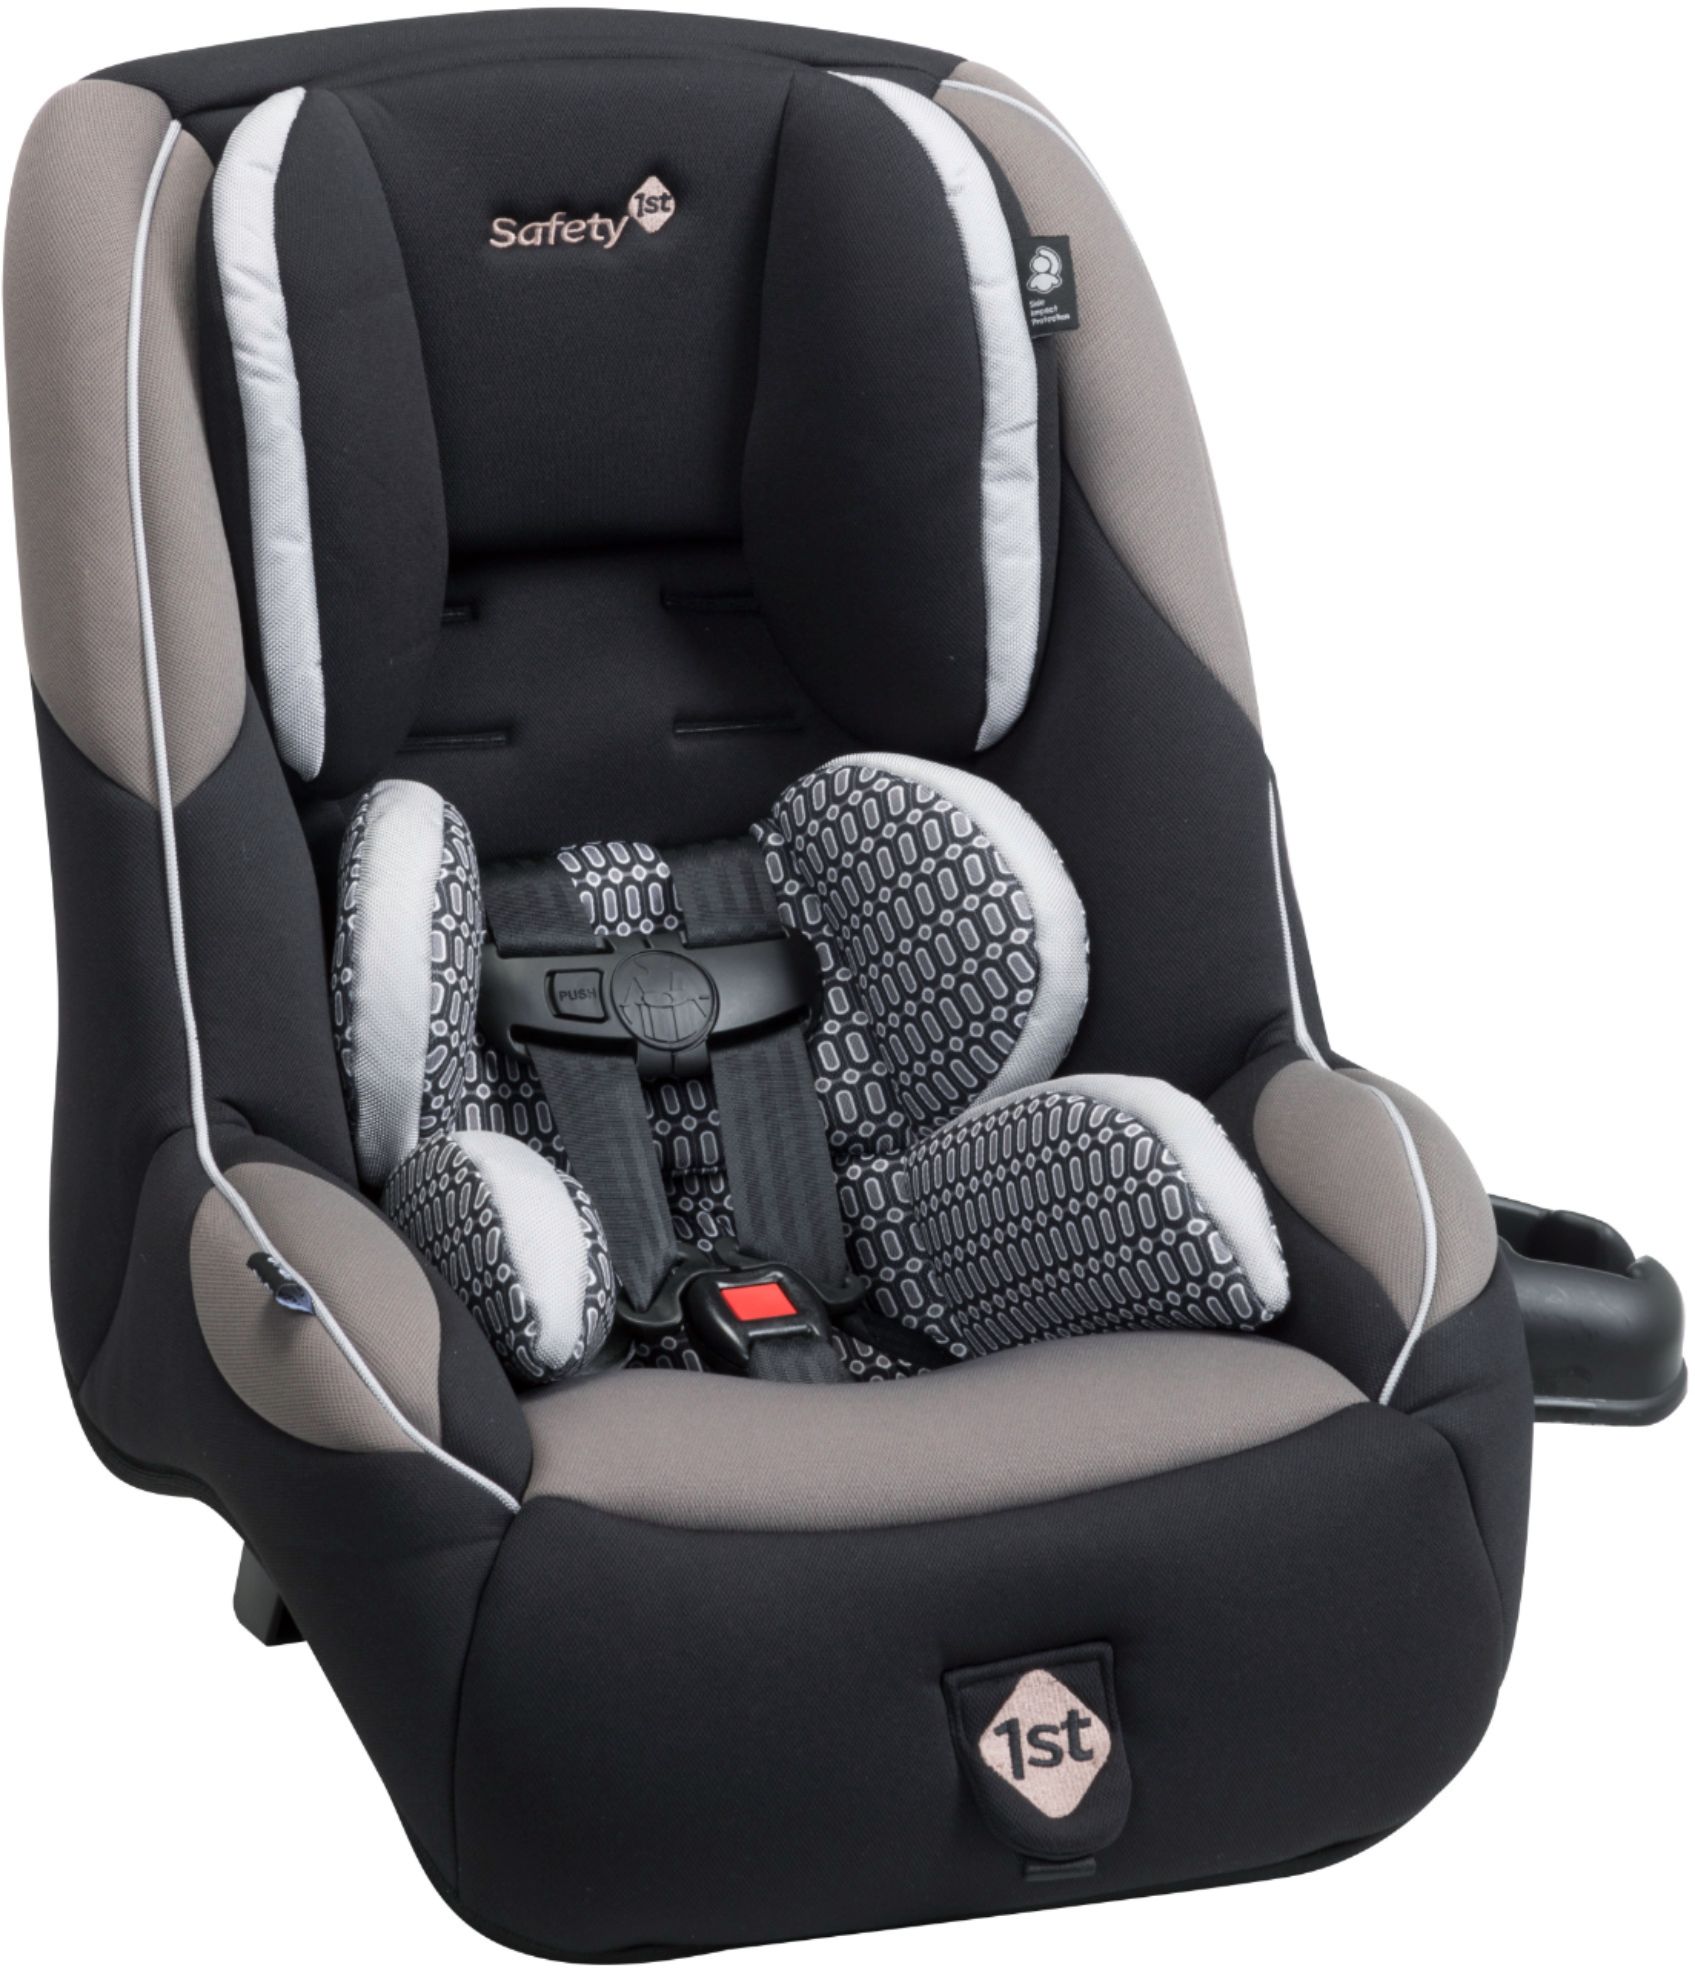 Angle View: Safety 1st - Guide 65 Convertible Car Seat - Grey